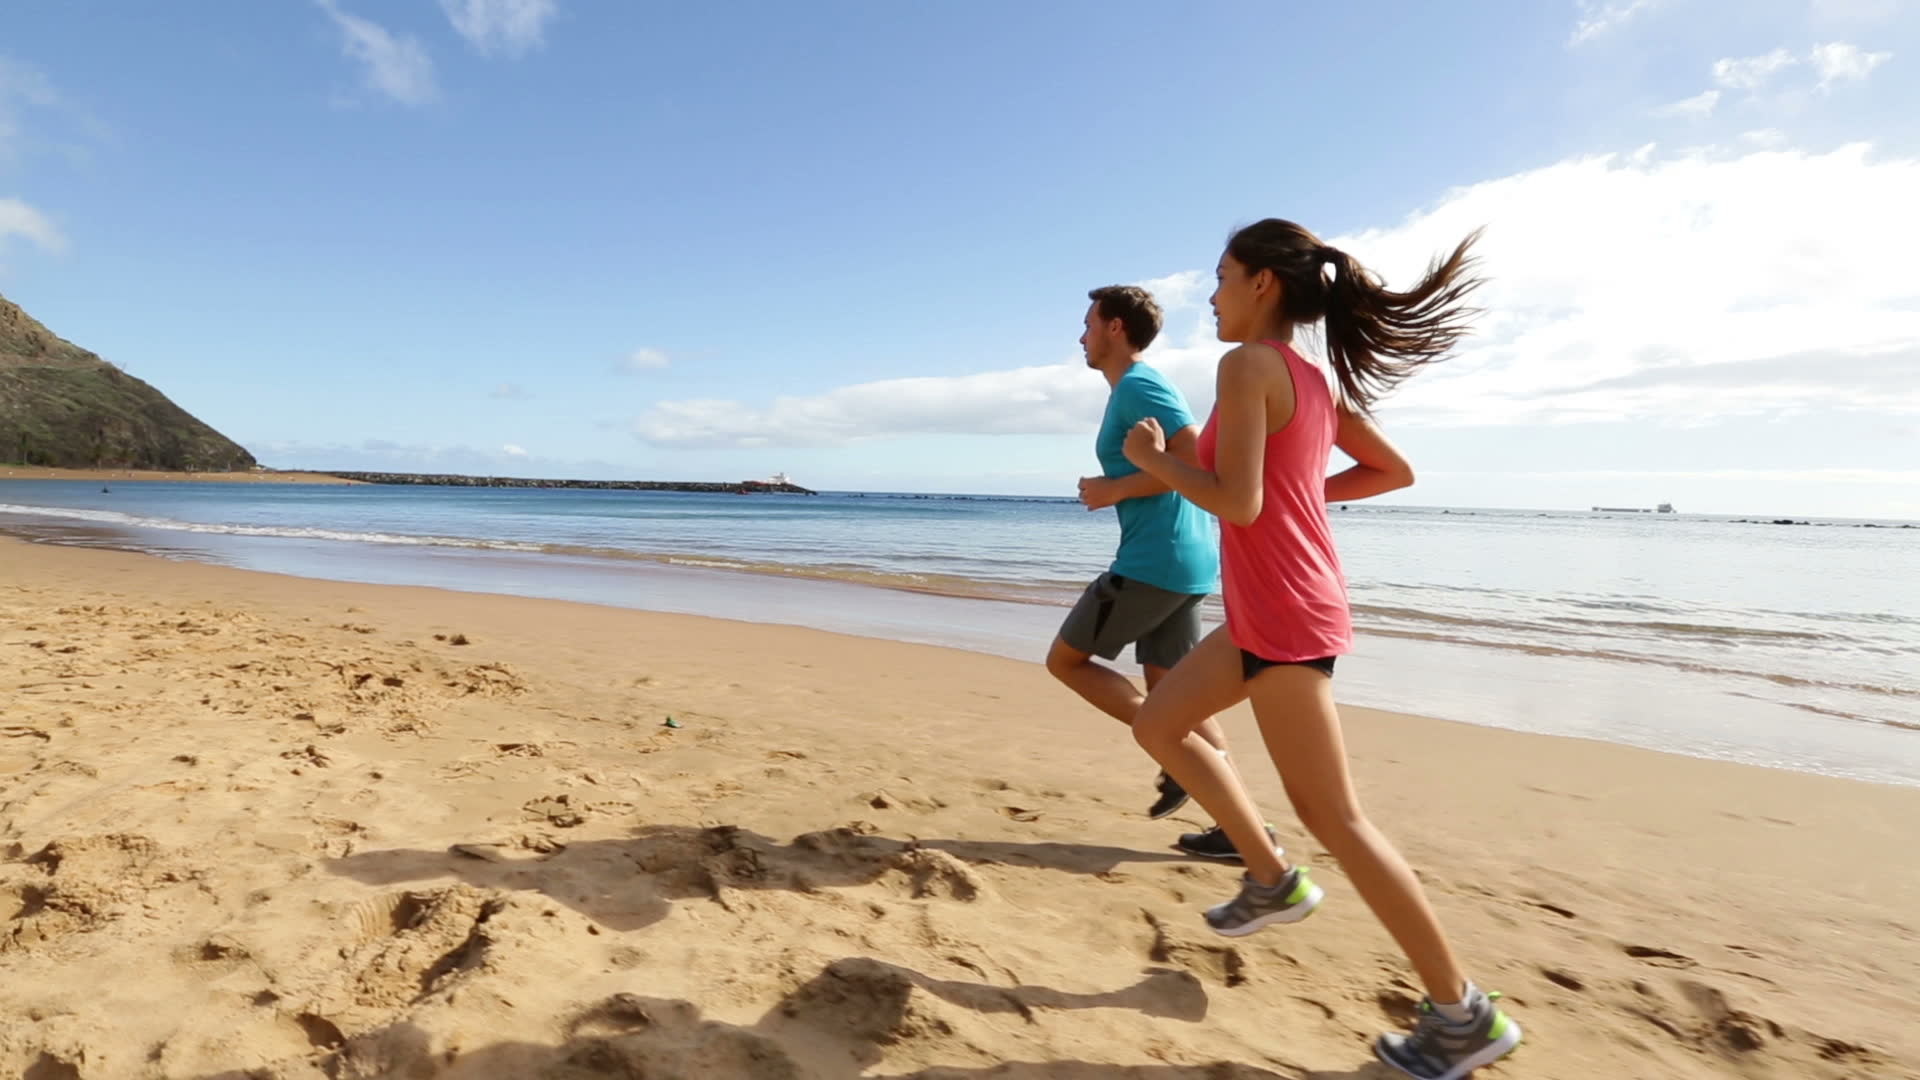 1920x1080 people-running-on-beach-jogging-widescreen-high-definition-wallpaper -for-desktop-background-download-jogging-images-free